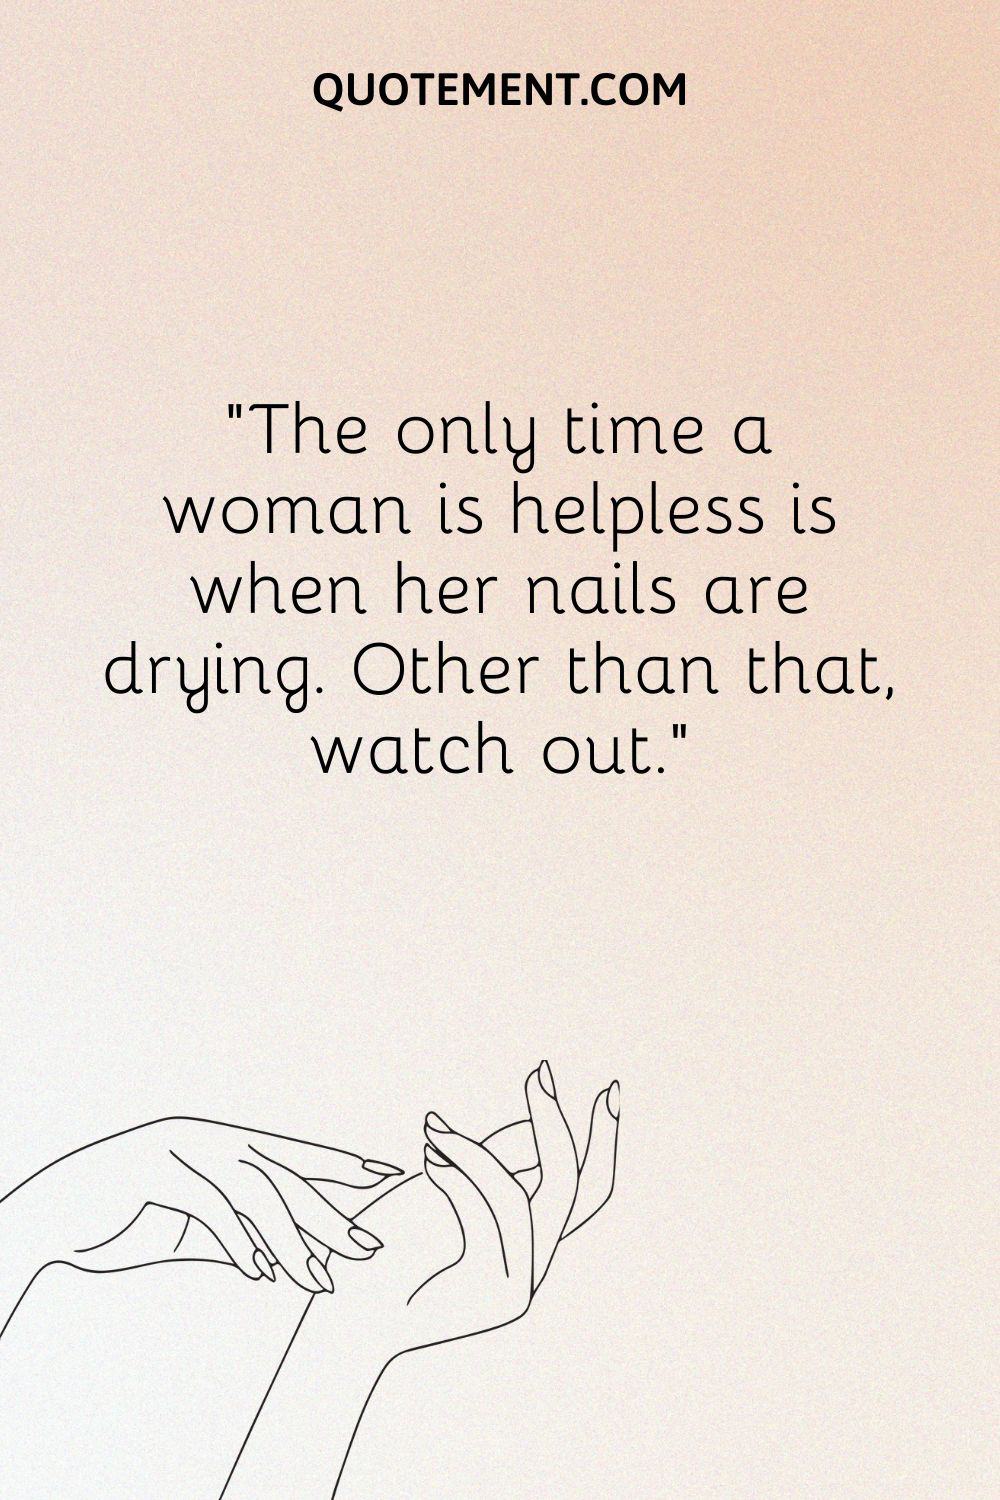 The only time a woman is helpless is when her nails are drying